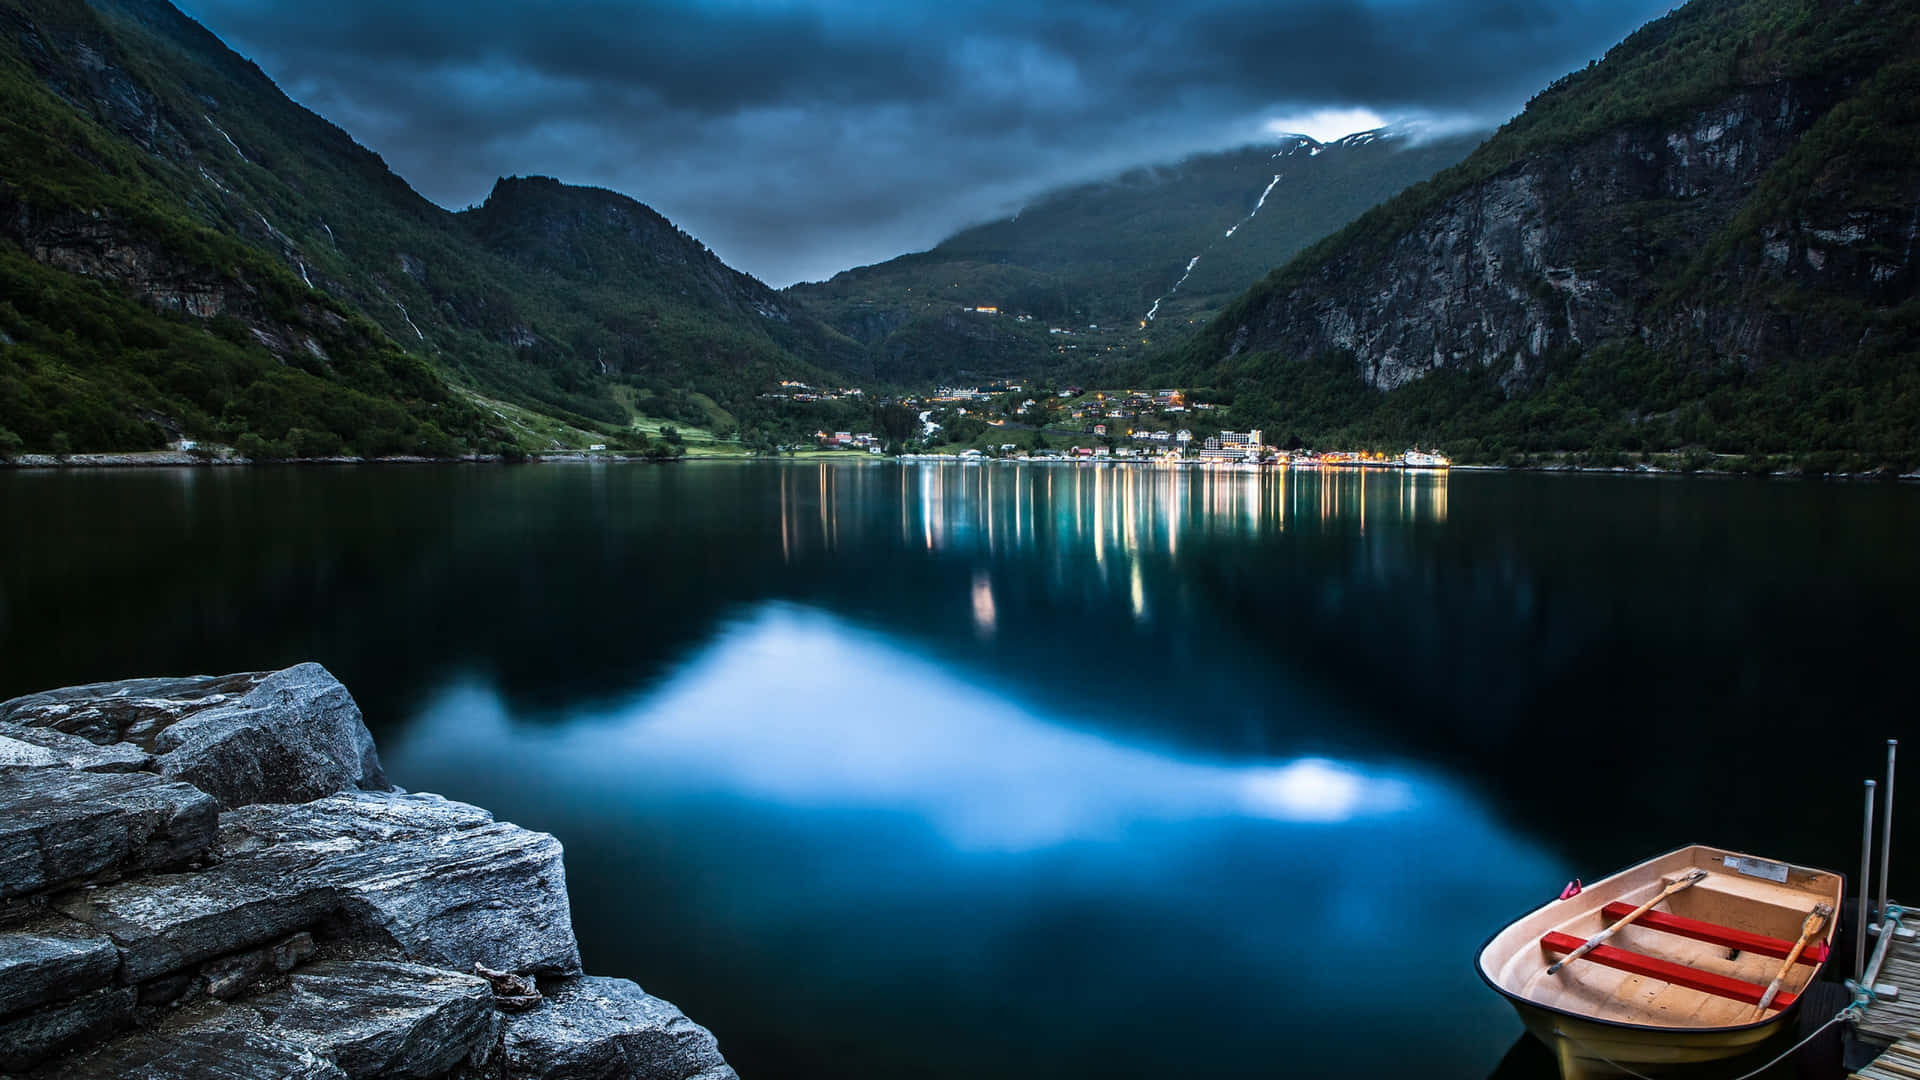 Experience the stillness of nature and soothe your soul with this beautiful mountain lake. Wallpaper